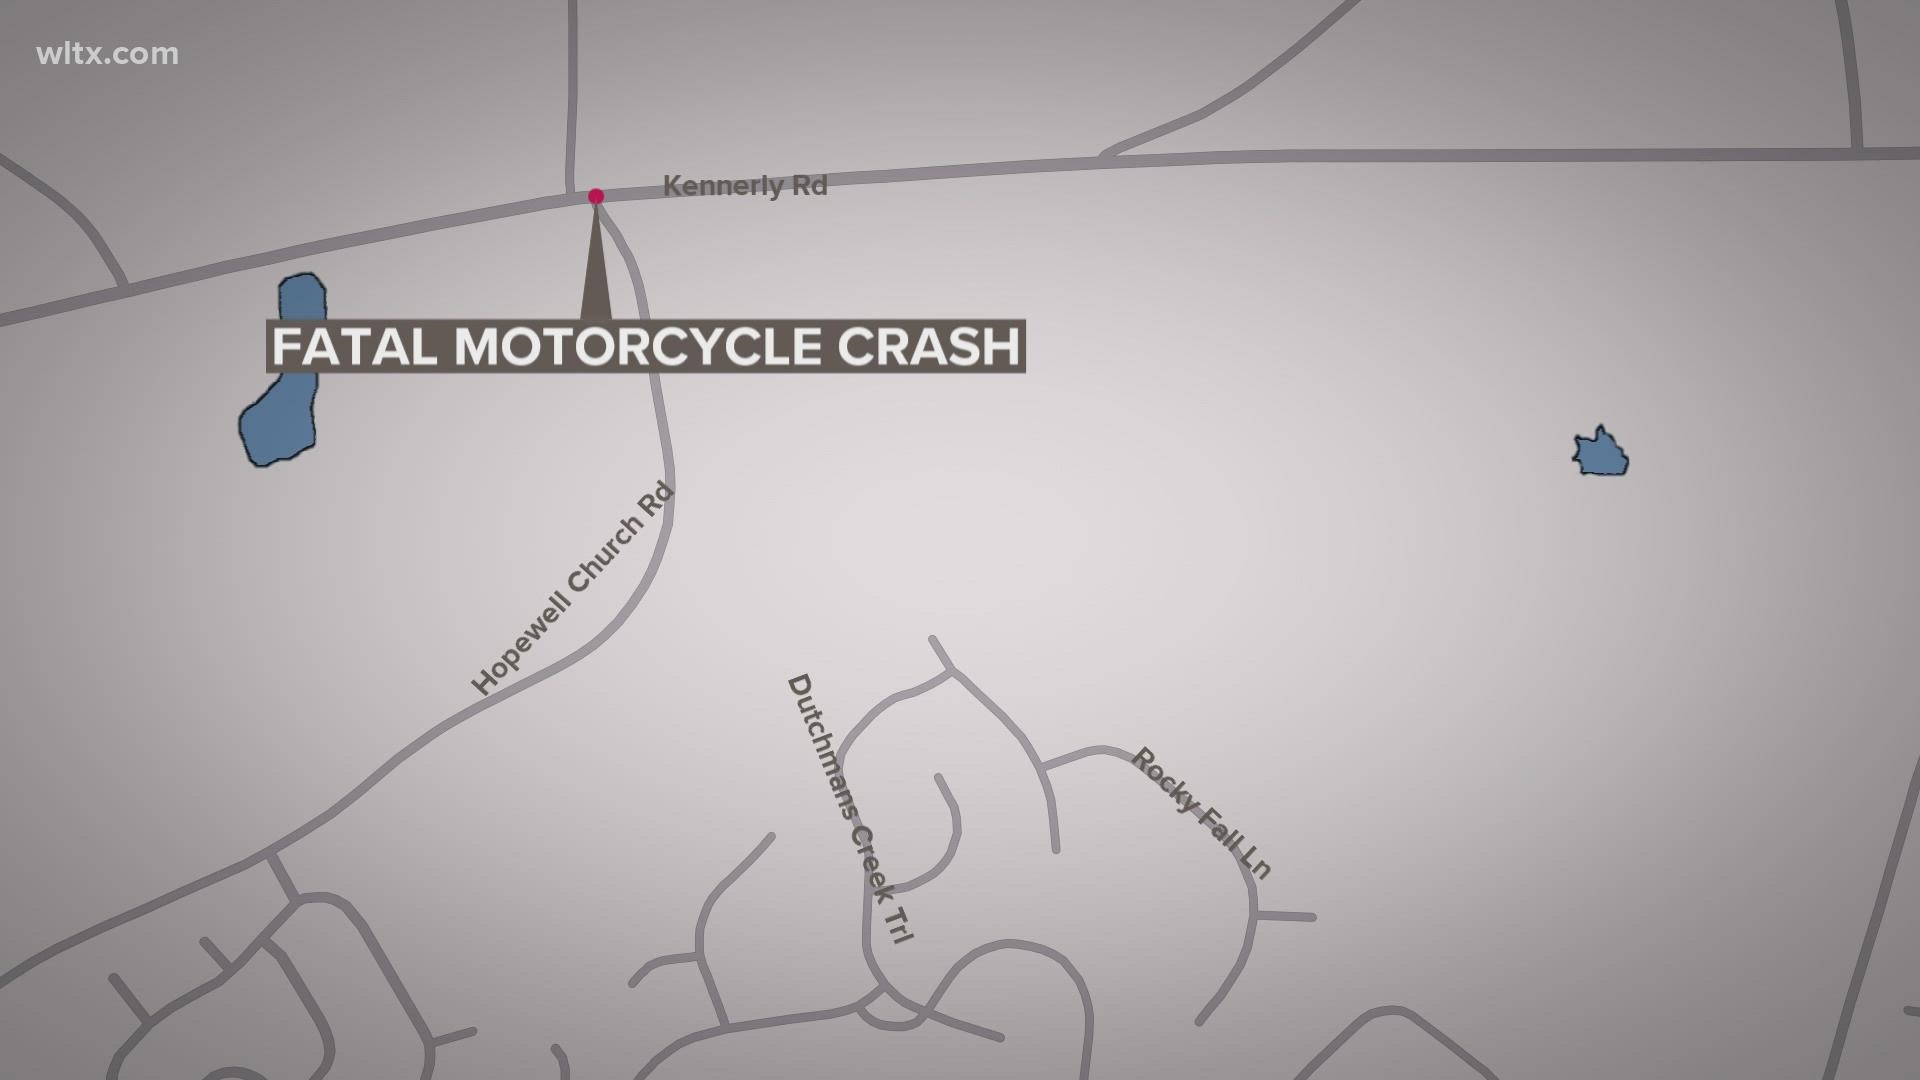 Troopers say the crash between a motorcyclist and a car happened at Kennerly road near Hopewell Church road.